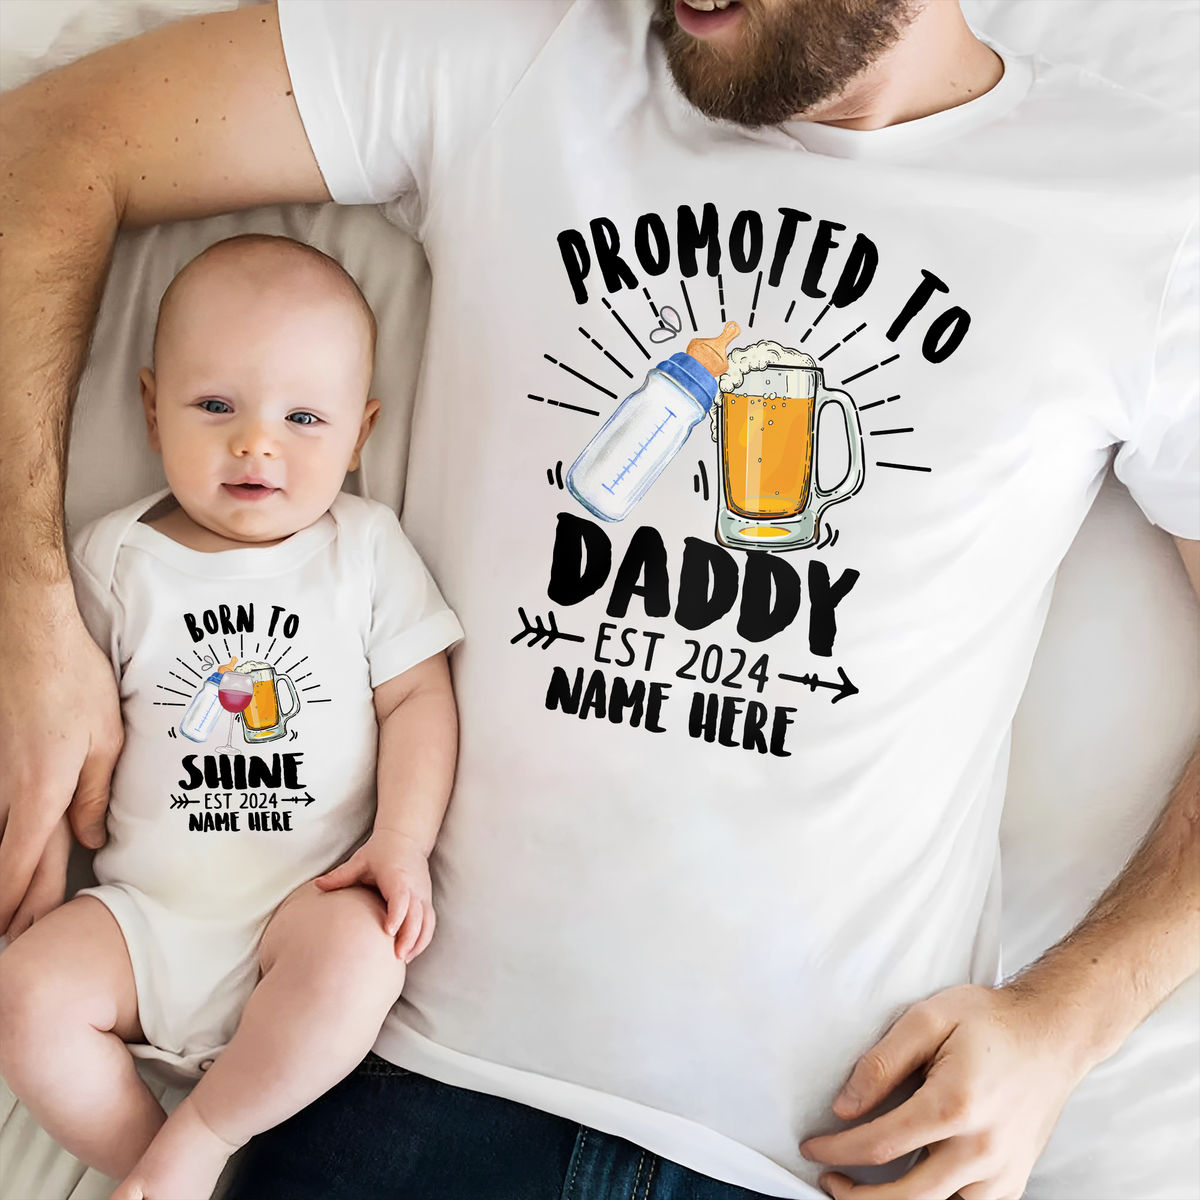 Personalized Shirt - Father's Day Gifts - Promoted To Daddy - New Dad Gifts - Gifts For Dad - Father's Day Shirts_2